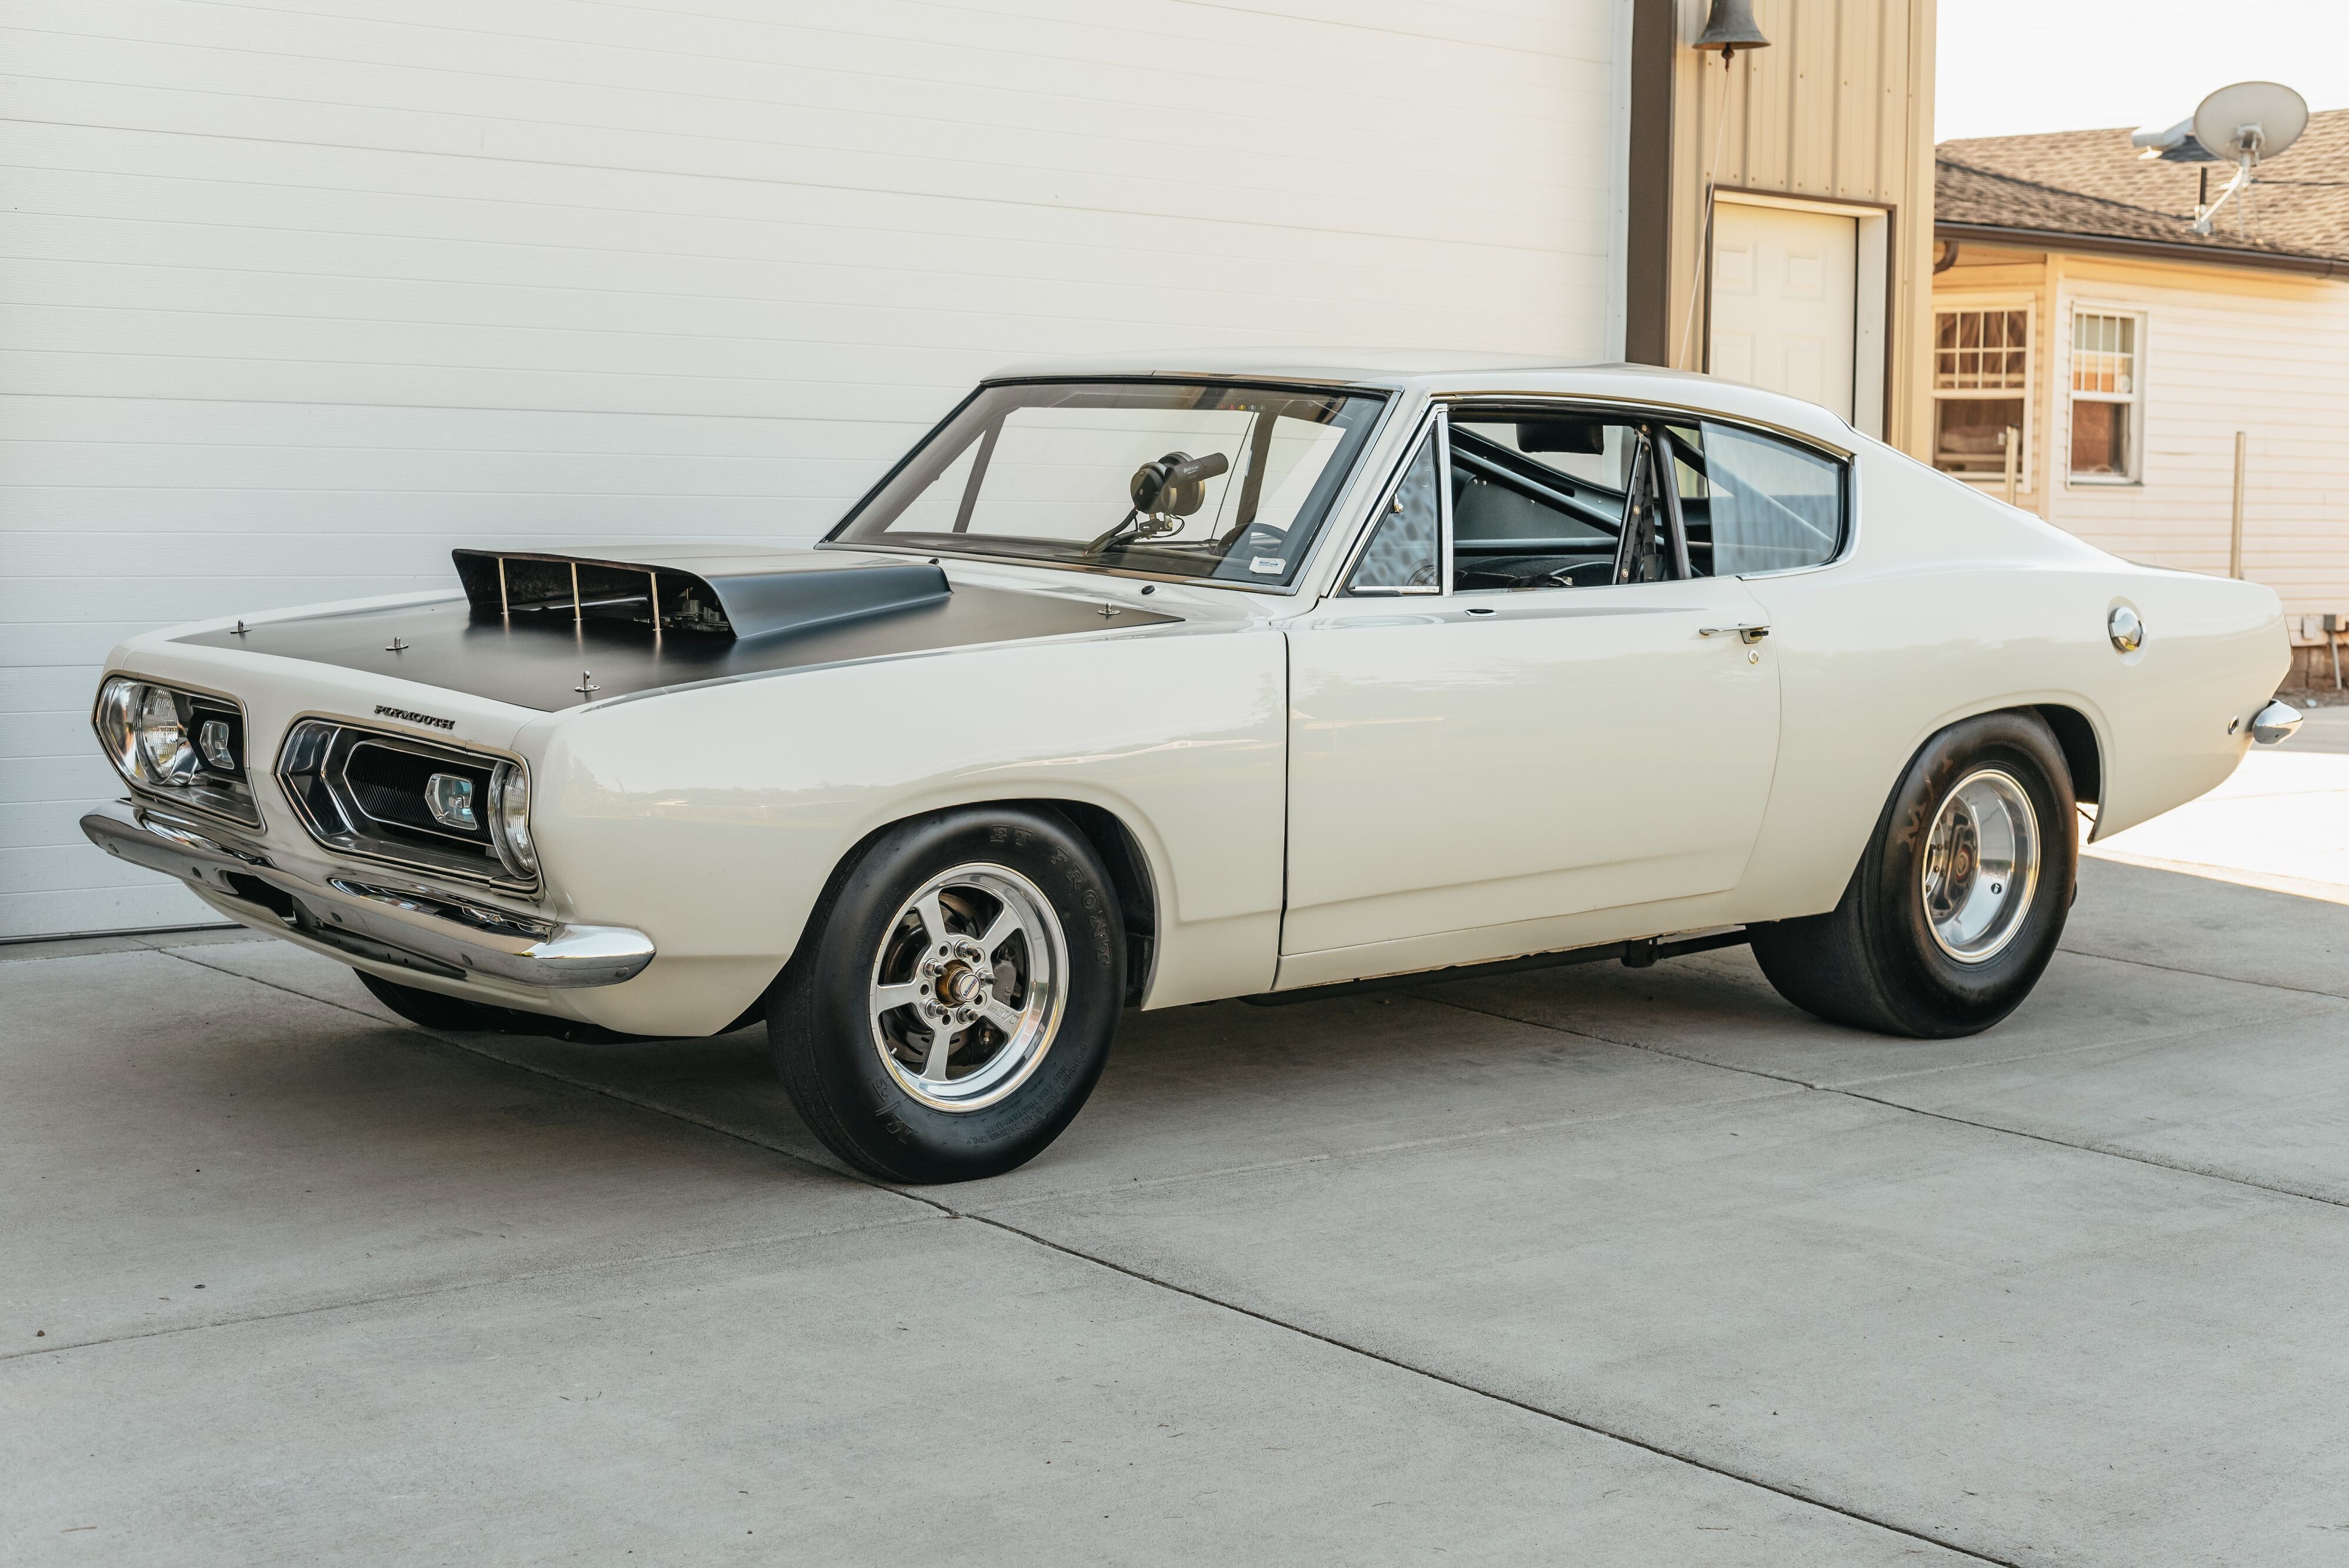 Find of the Day: Is the Fastest Factory '60s Muscle Car a B029 Hemi-Powered 1968 Plymouth Barracuda?